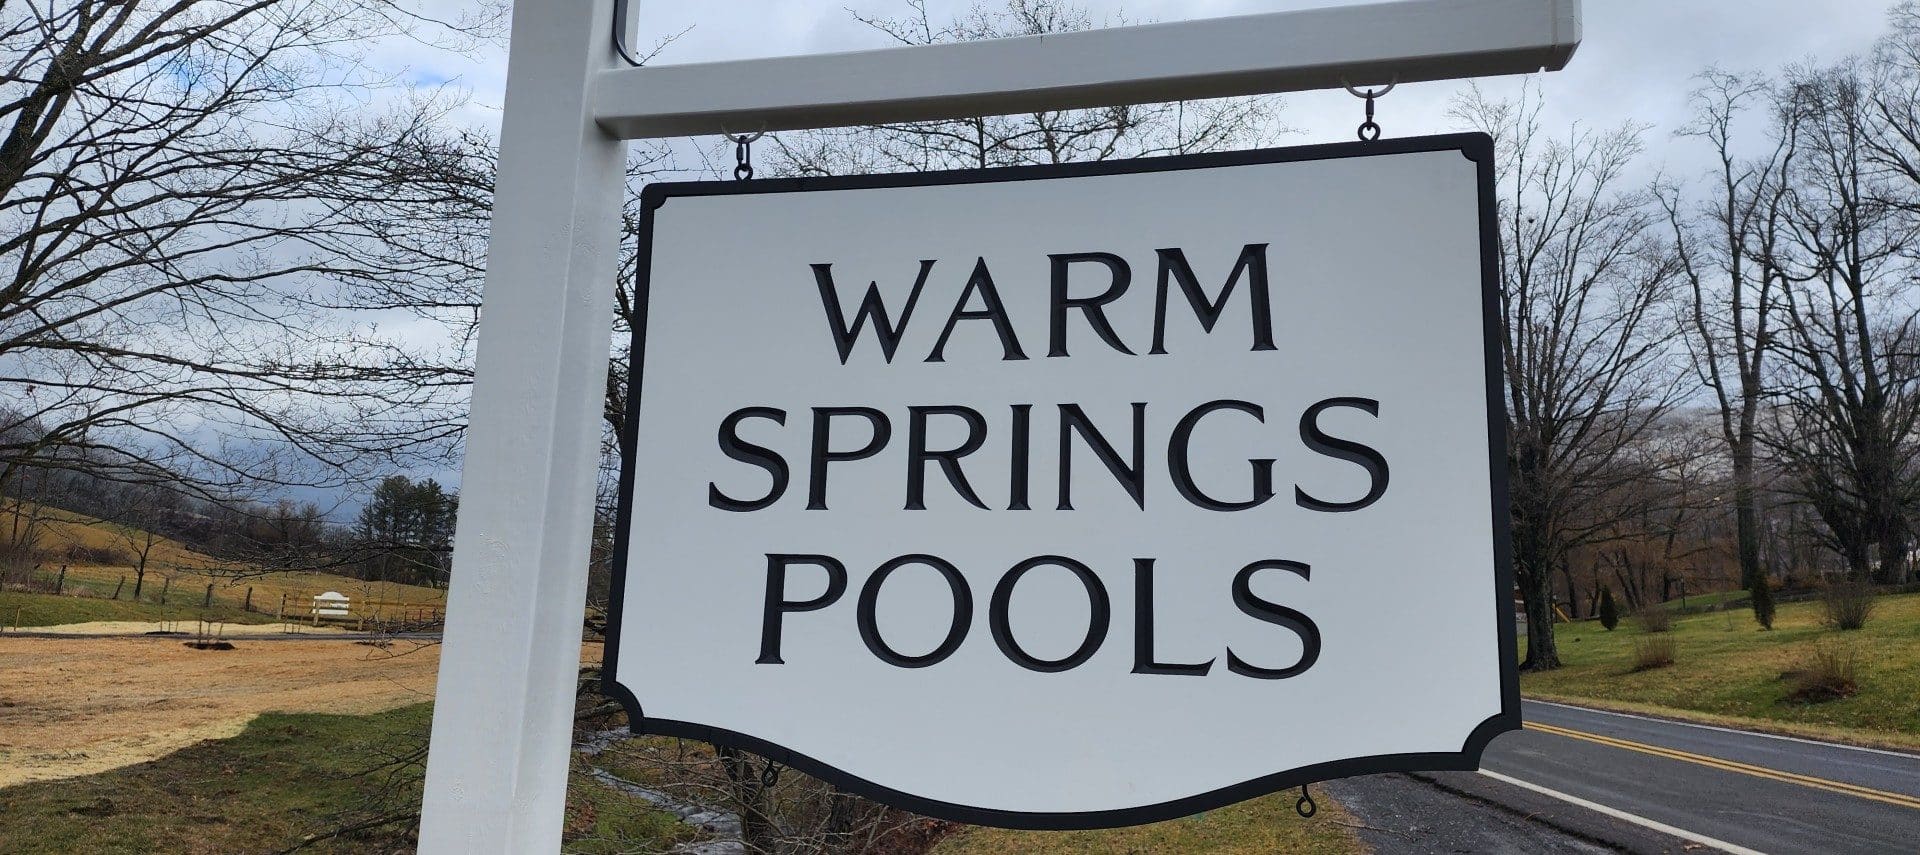 White business sign for Warm Springs Pools by the side of a road